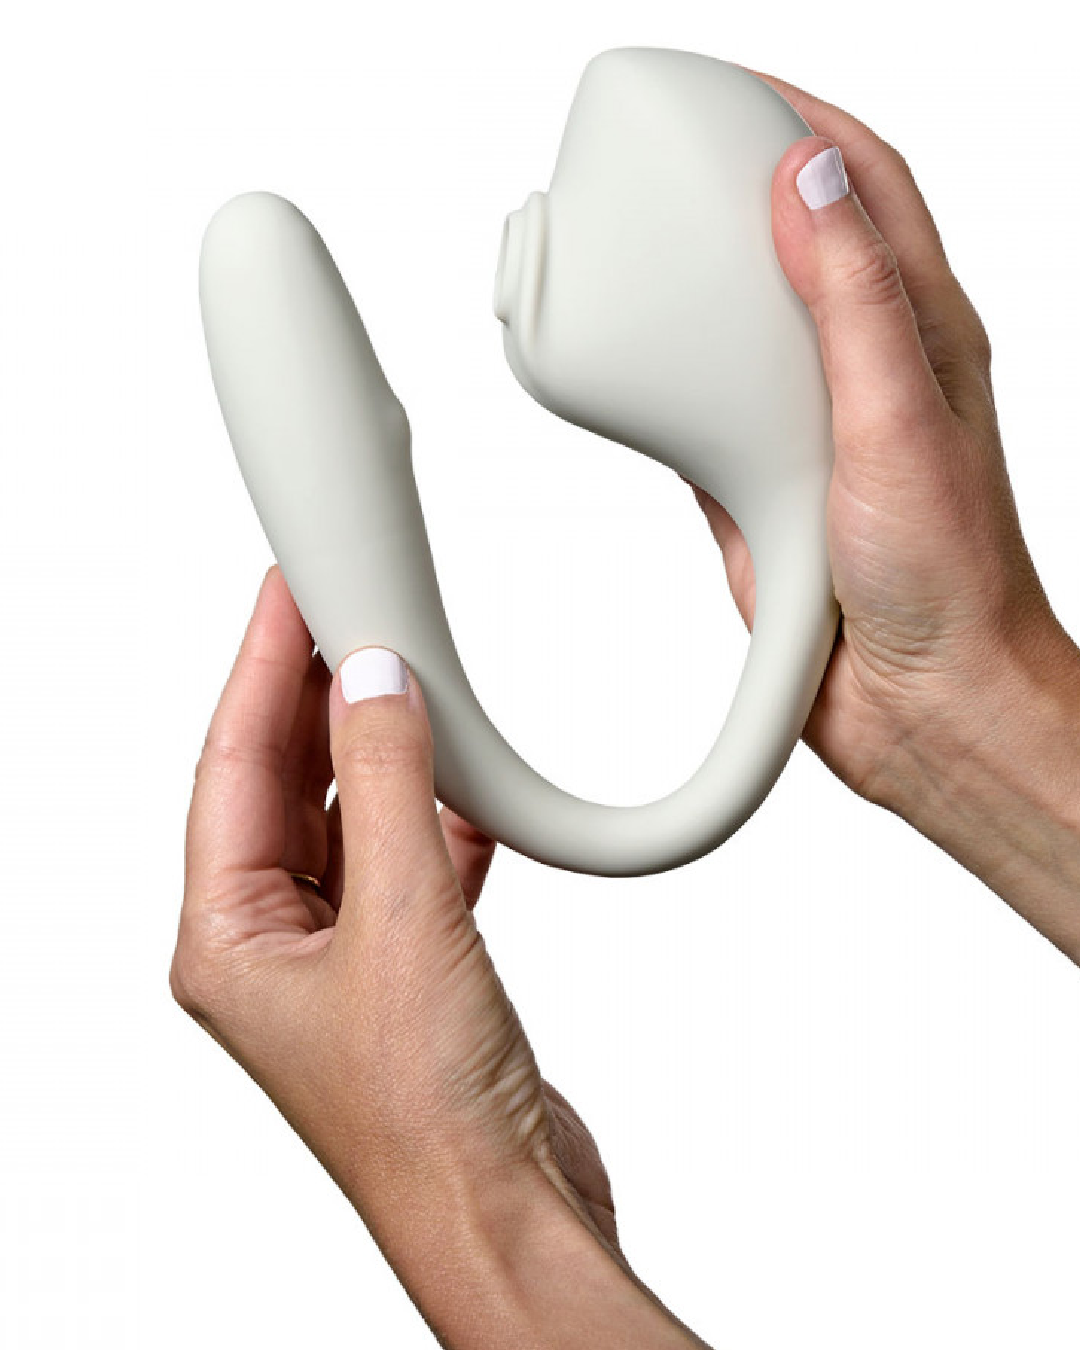 Lora DiCarlo Osé 2 Robotic Clitoral Suction & G-Spot Vibe held in a person's hand illustrating the size